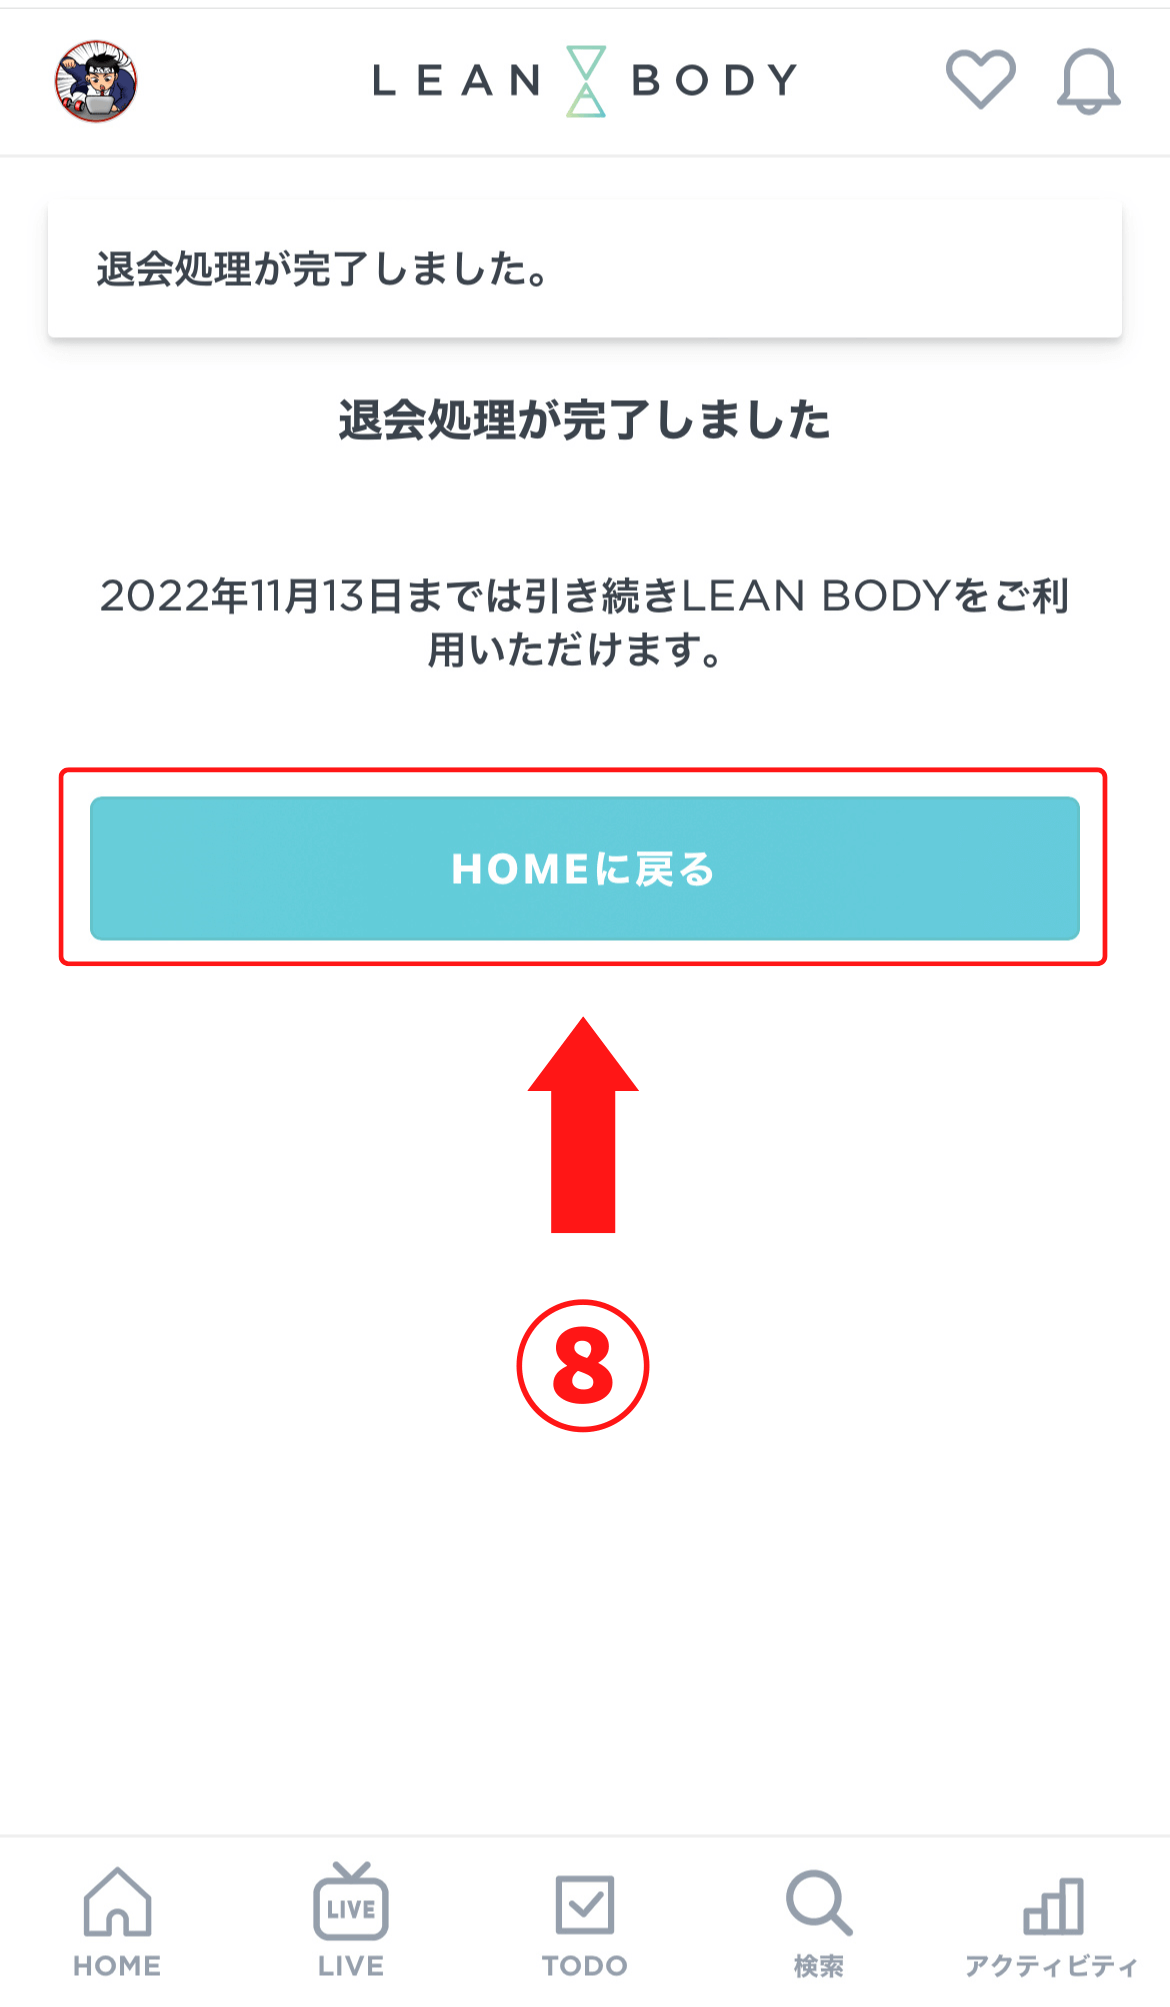 「HOMEに戻る」で完了！